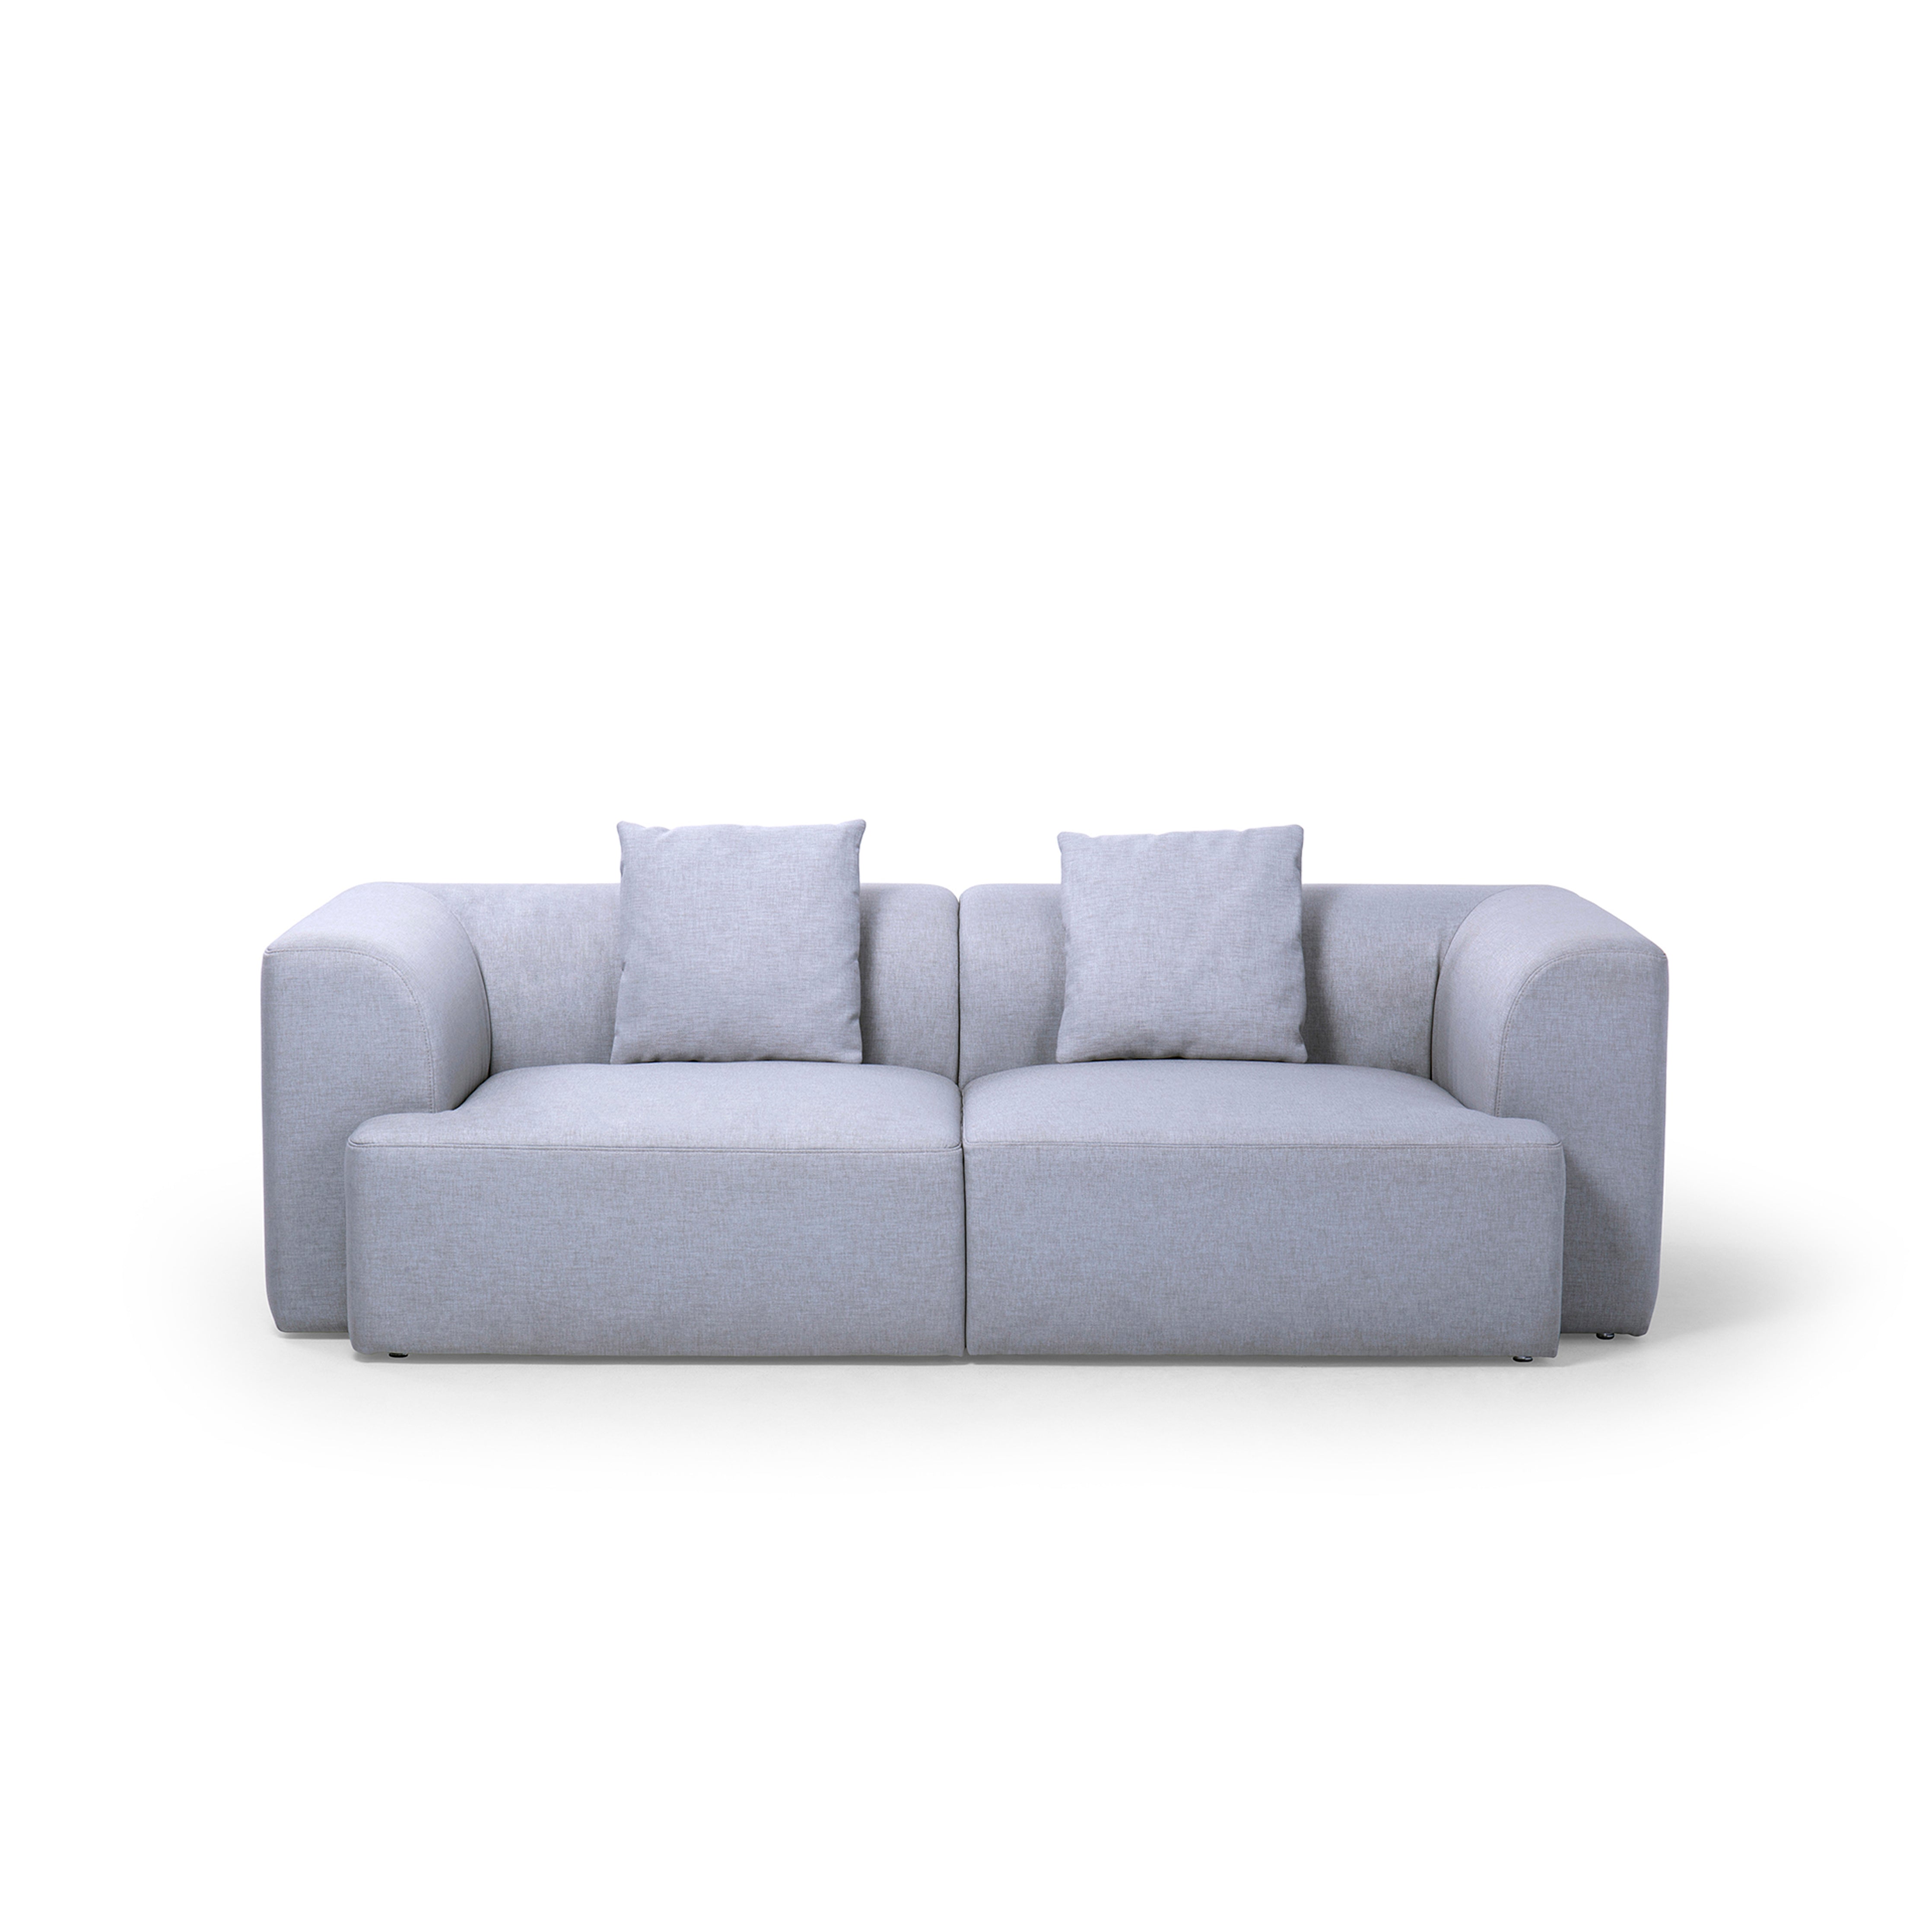 Nutty - 2/3 Seater / L Shape